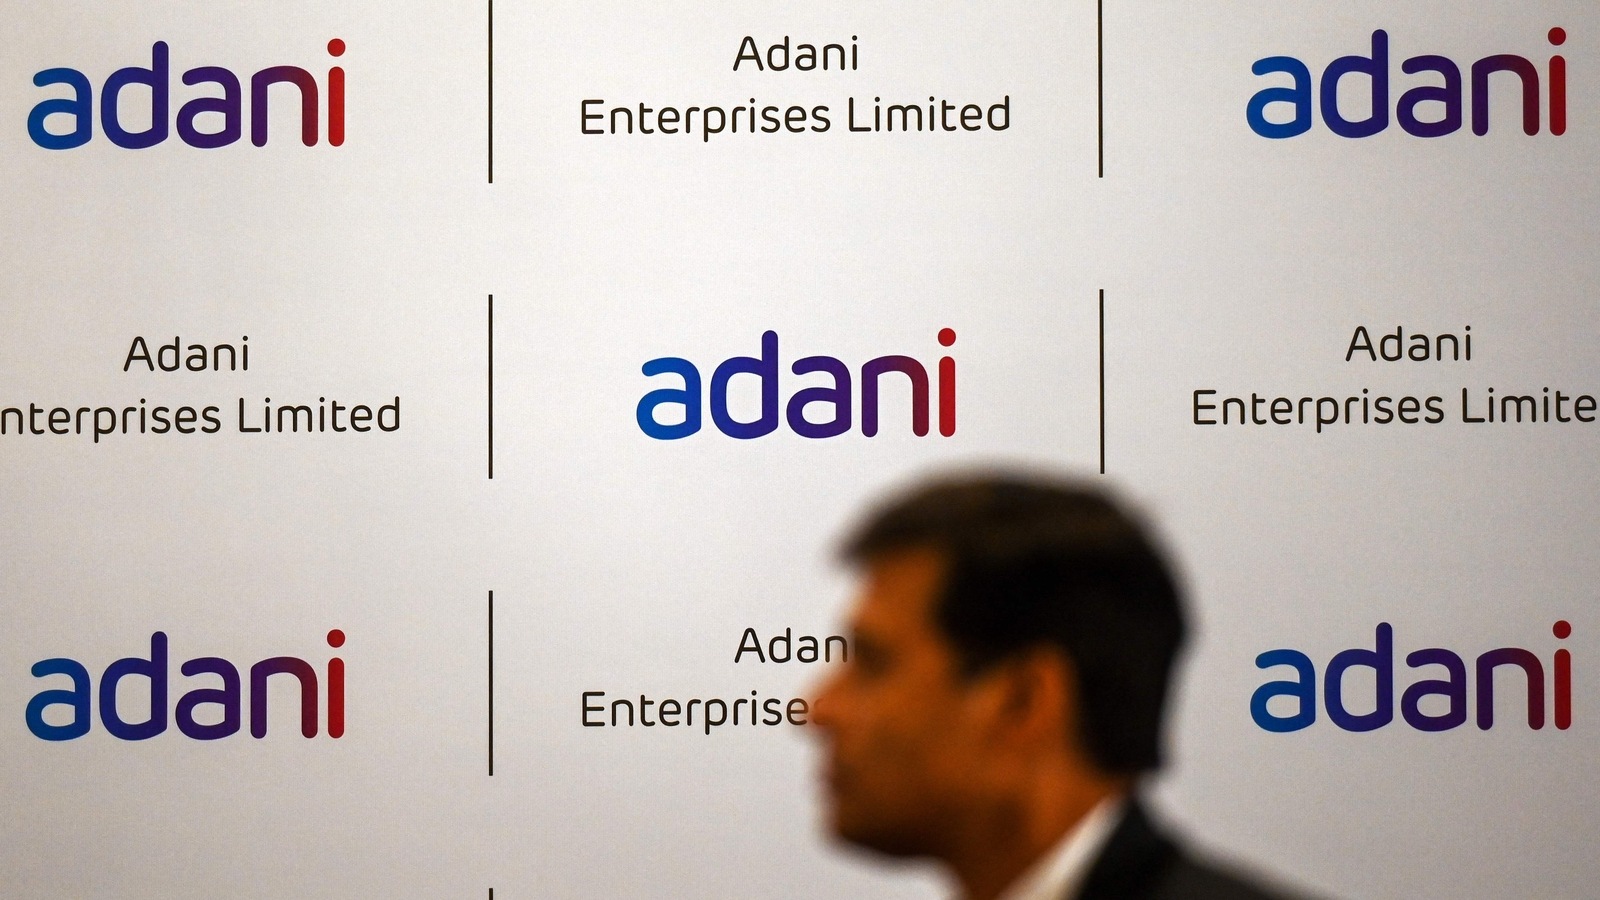 Adani’s bid to restore confidence post rout, likely to prepay share pledges